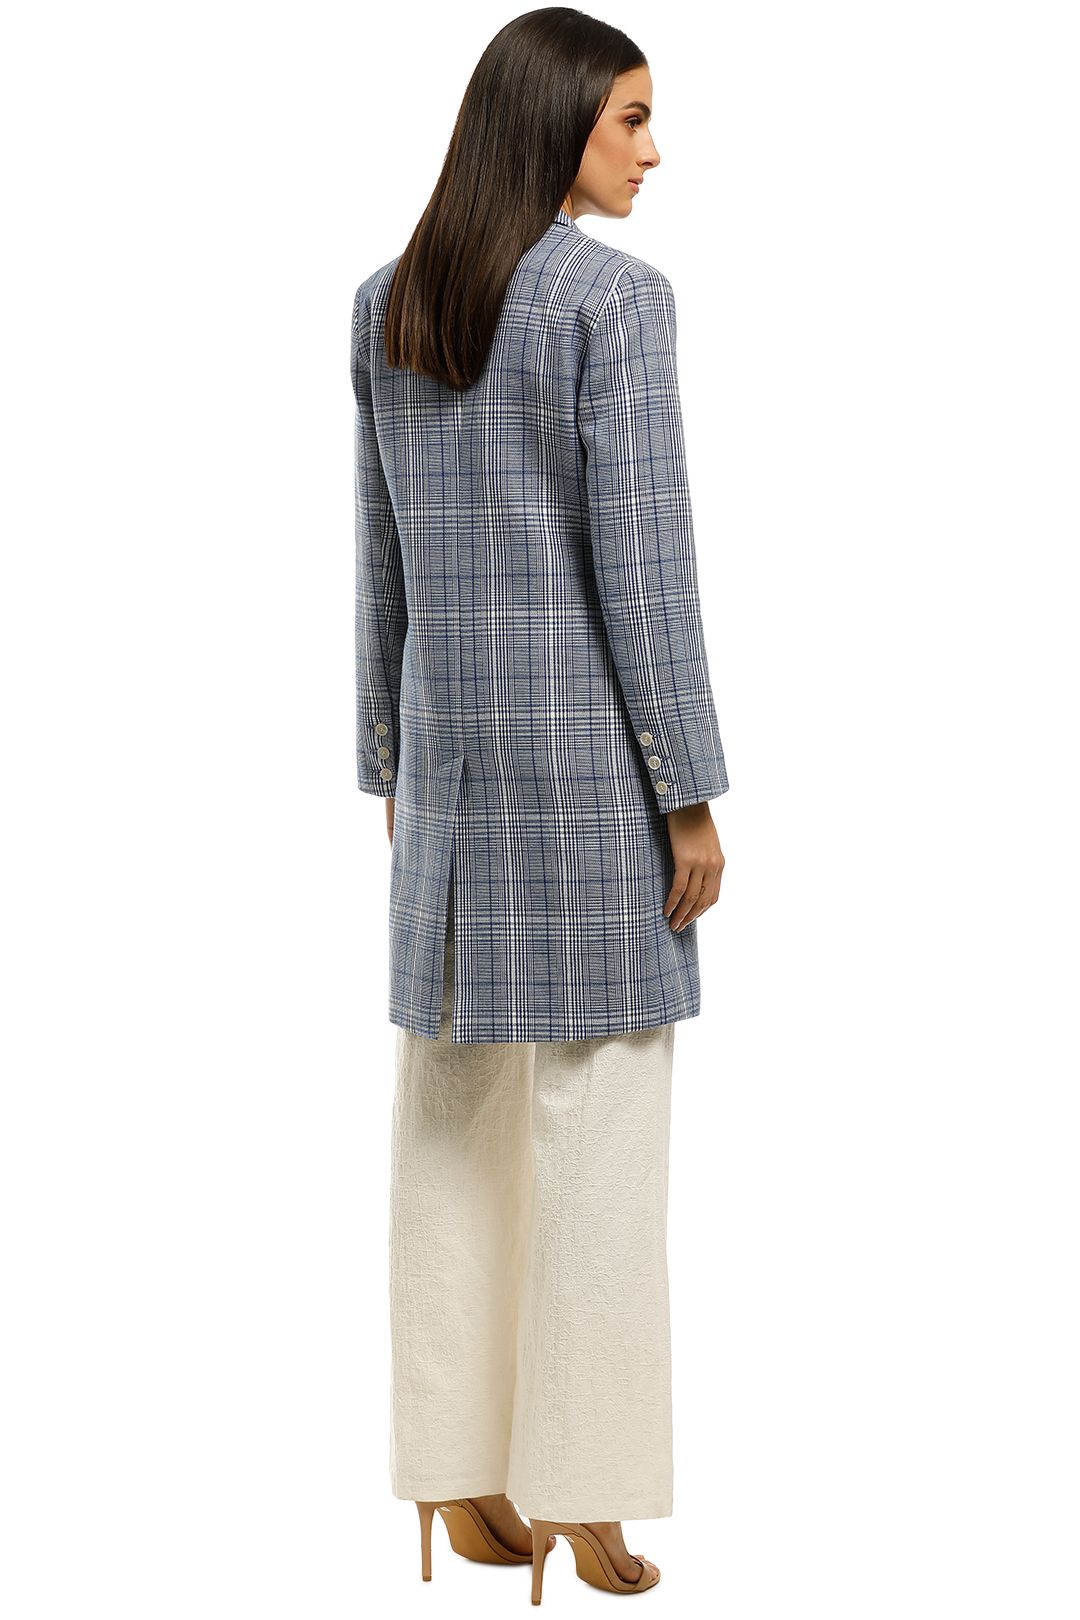 Cooper-By-Trelise-Cooper-Power-Suit-Coat-Blue-Check-Back